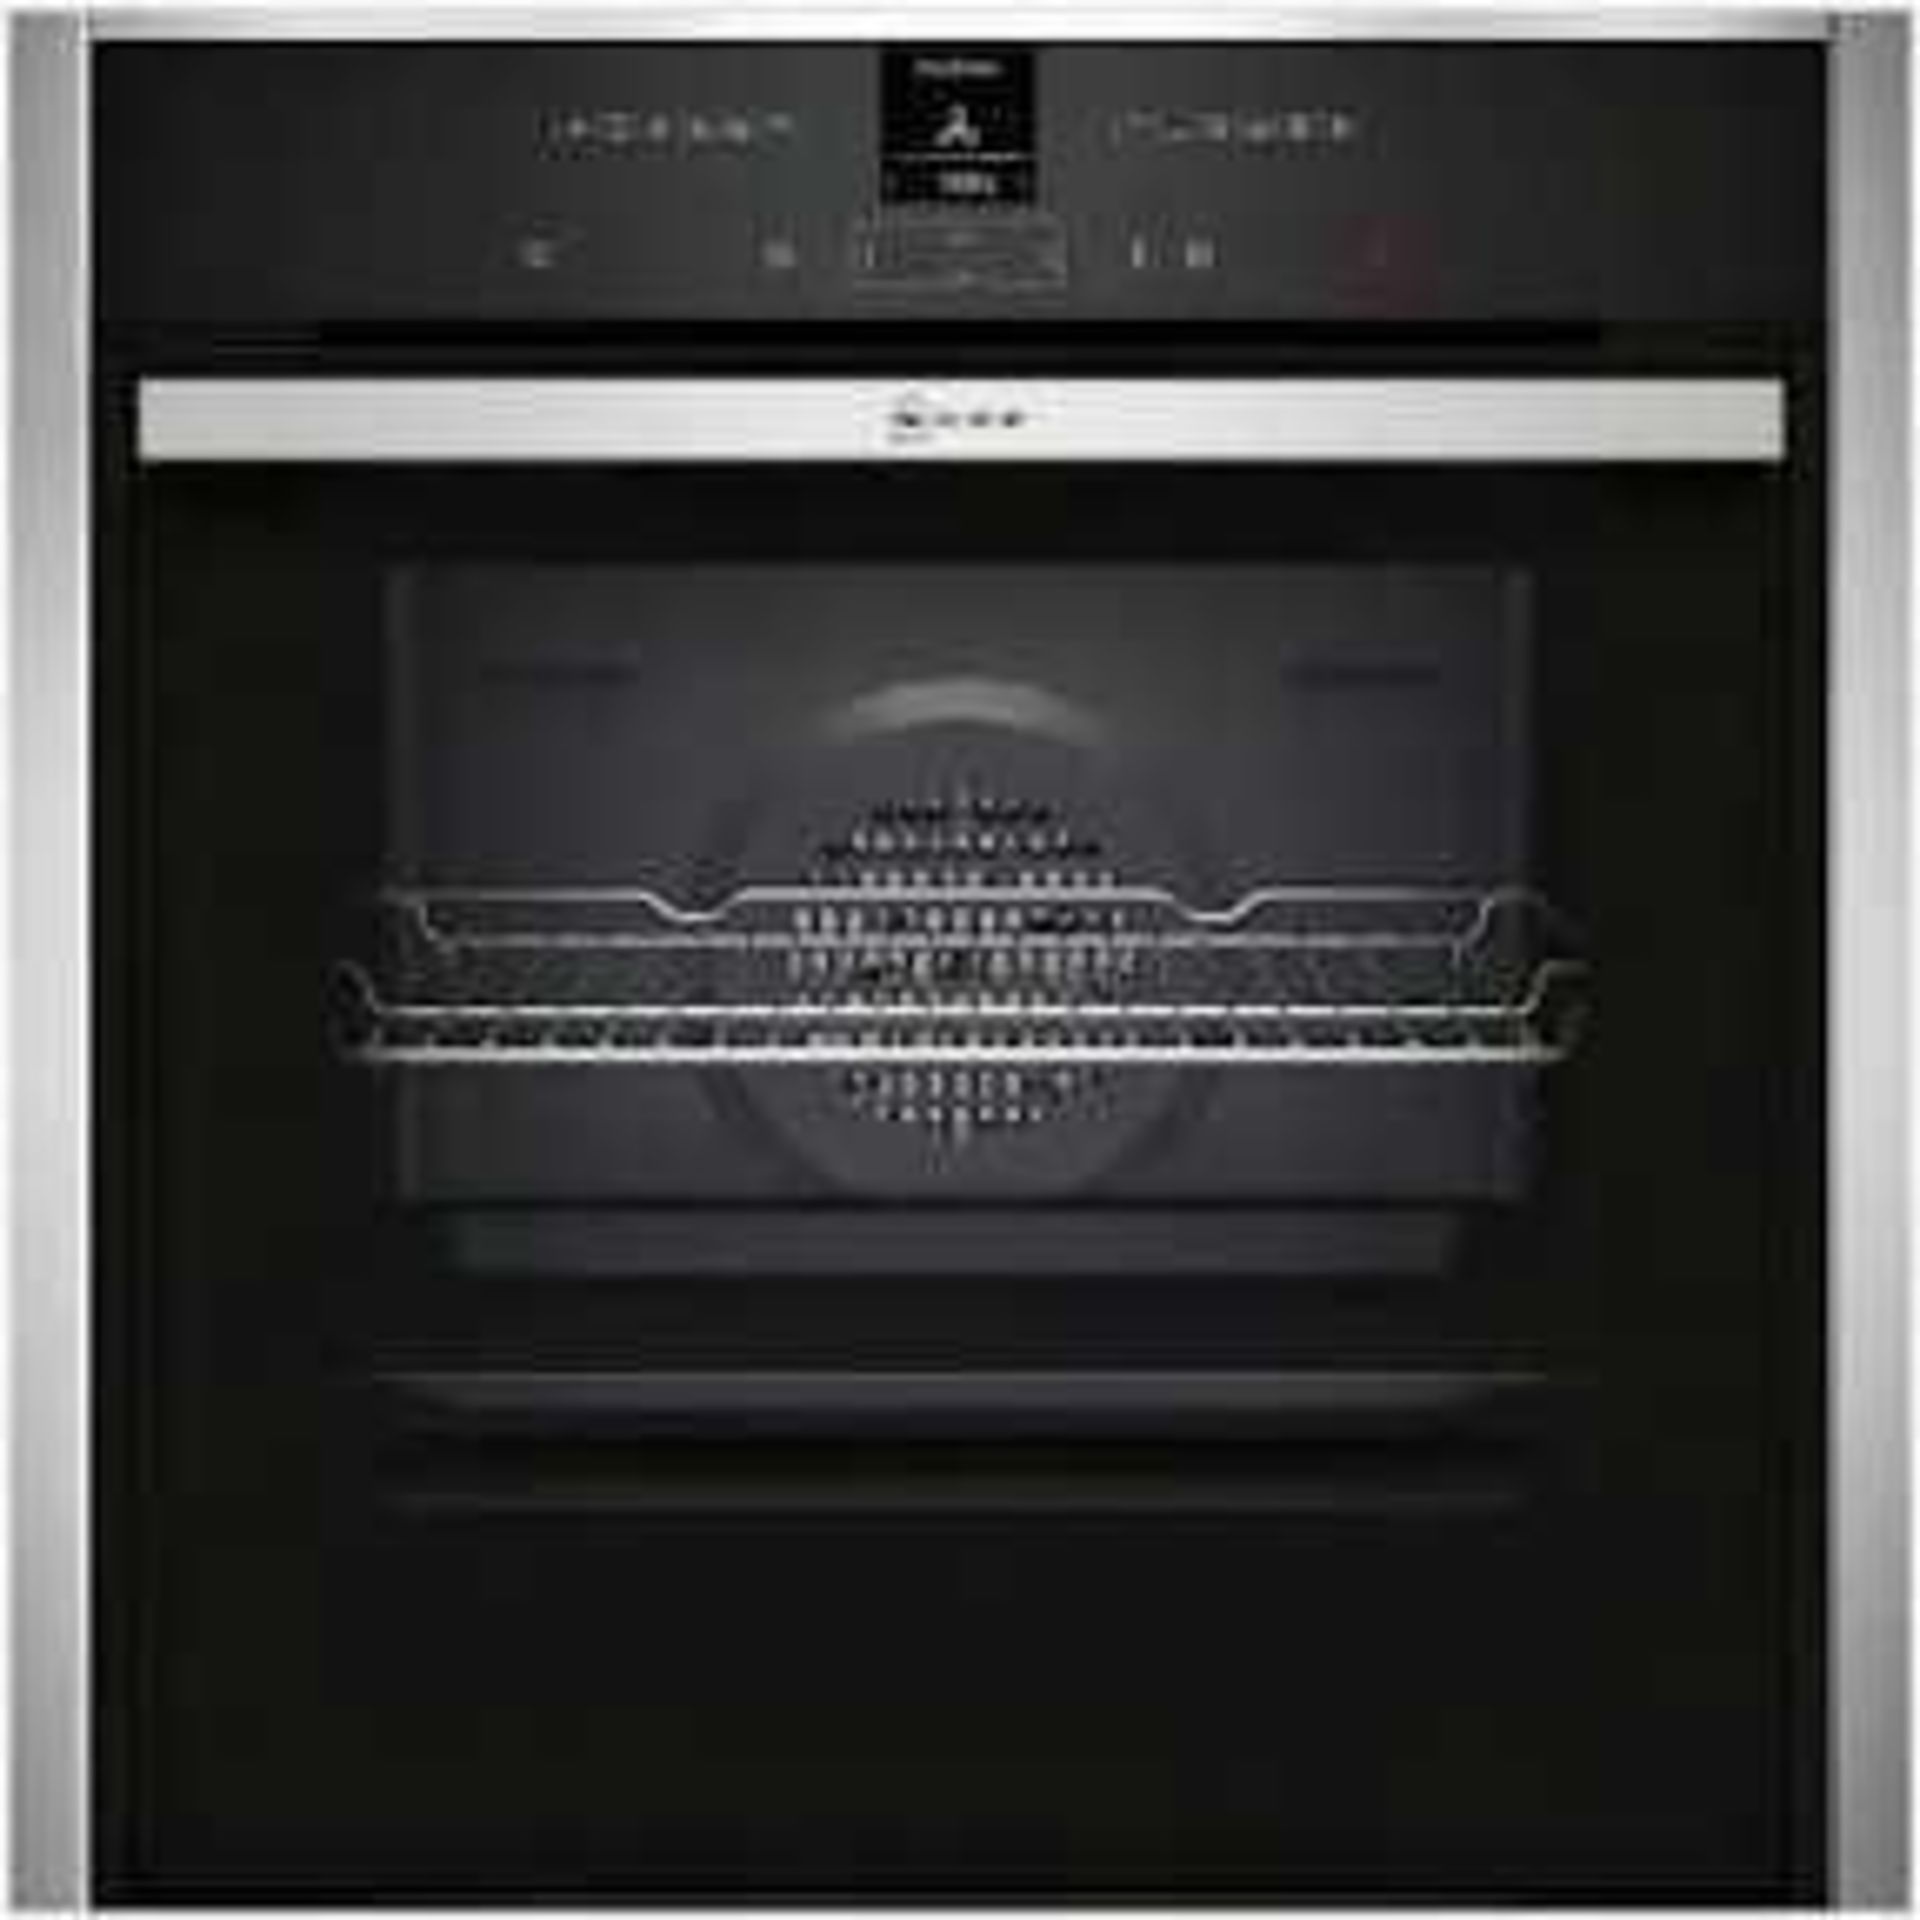 RRP £740 Boxed Neff B57Cr22Nob Stainless Steel Fully Integrated Single Electric Oven (Appraisals